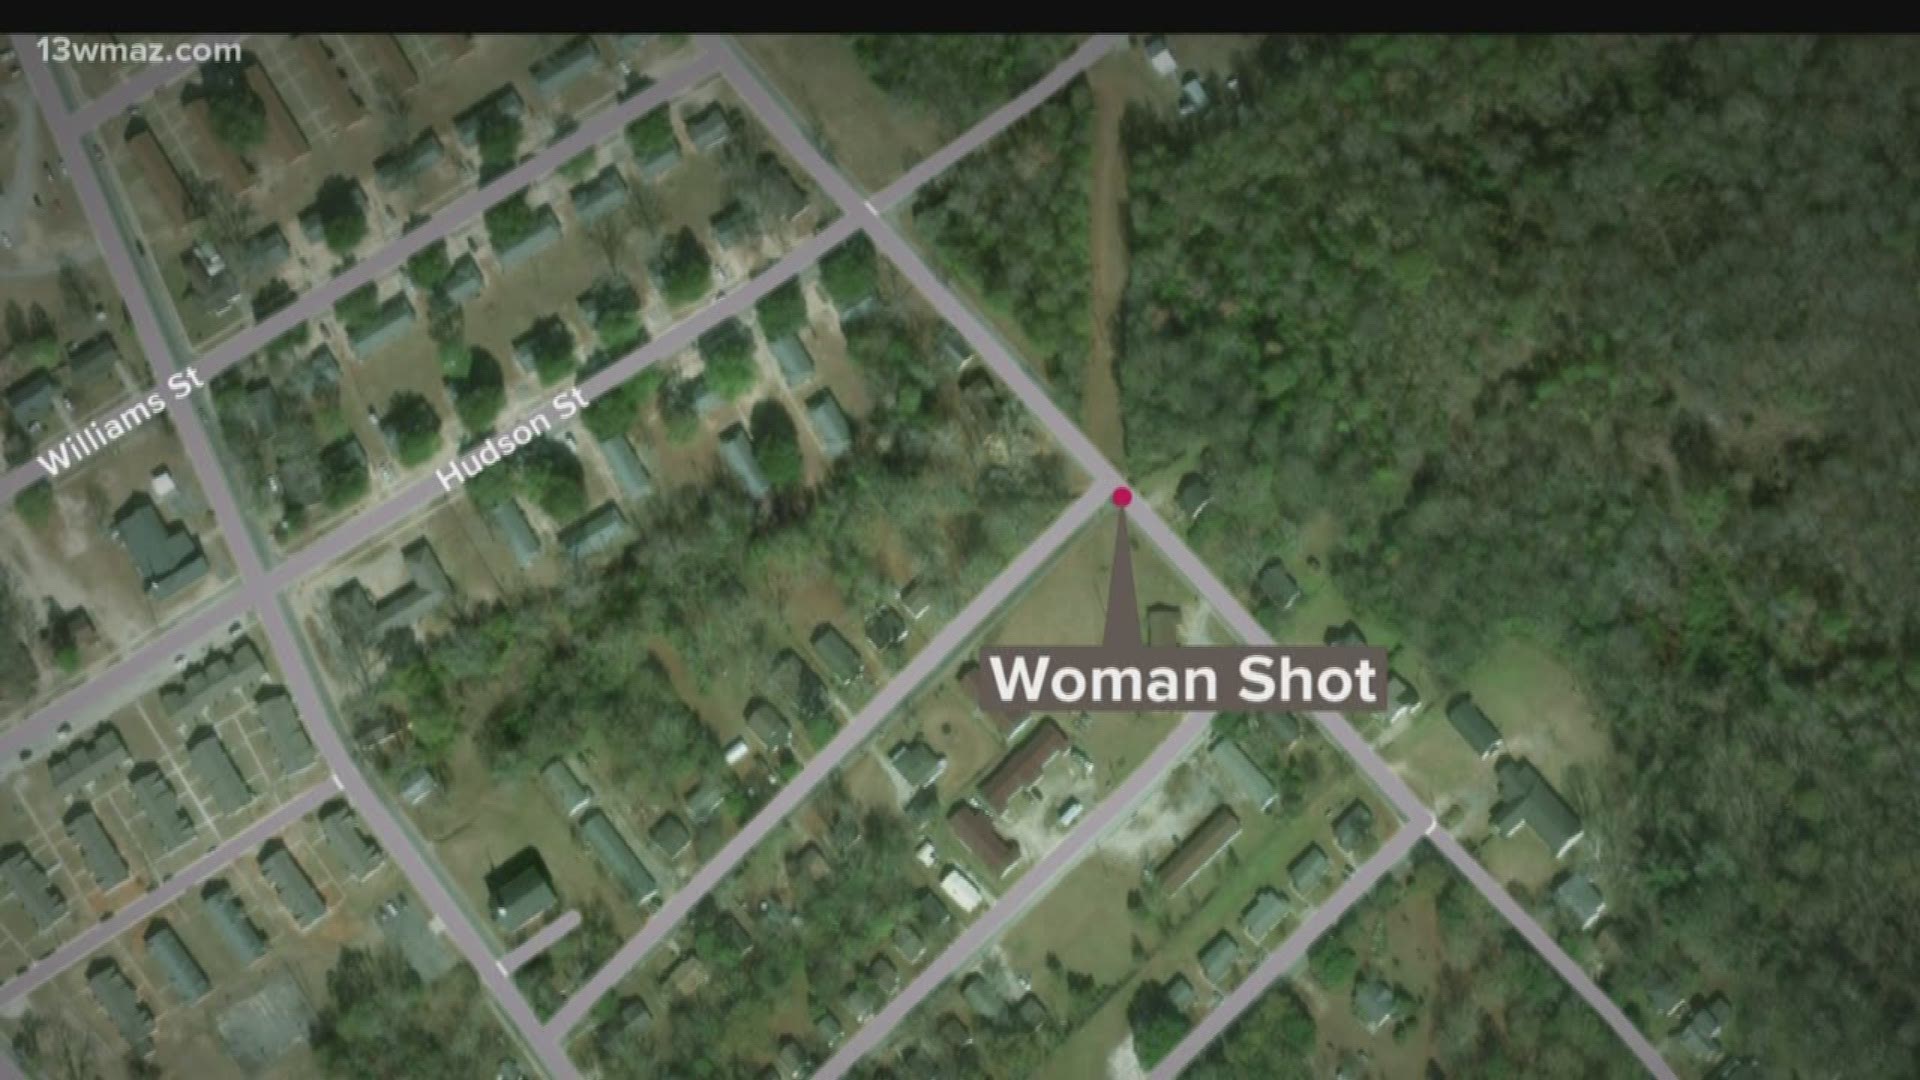 Dublin police are looking into how a young woman was shot while driving her car Wednesday afternoon.